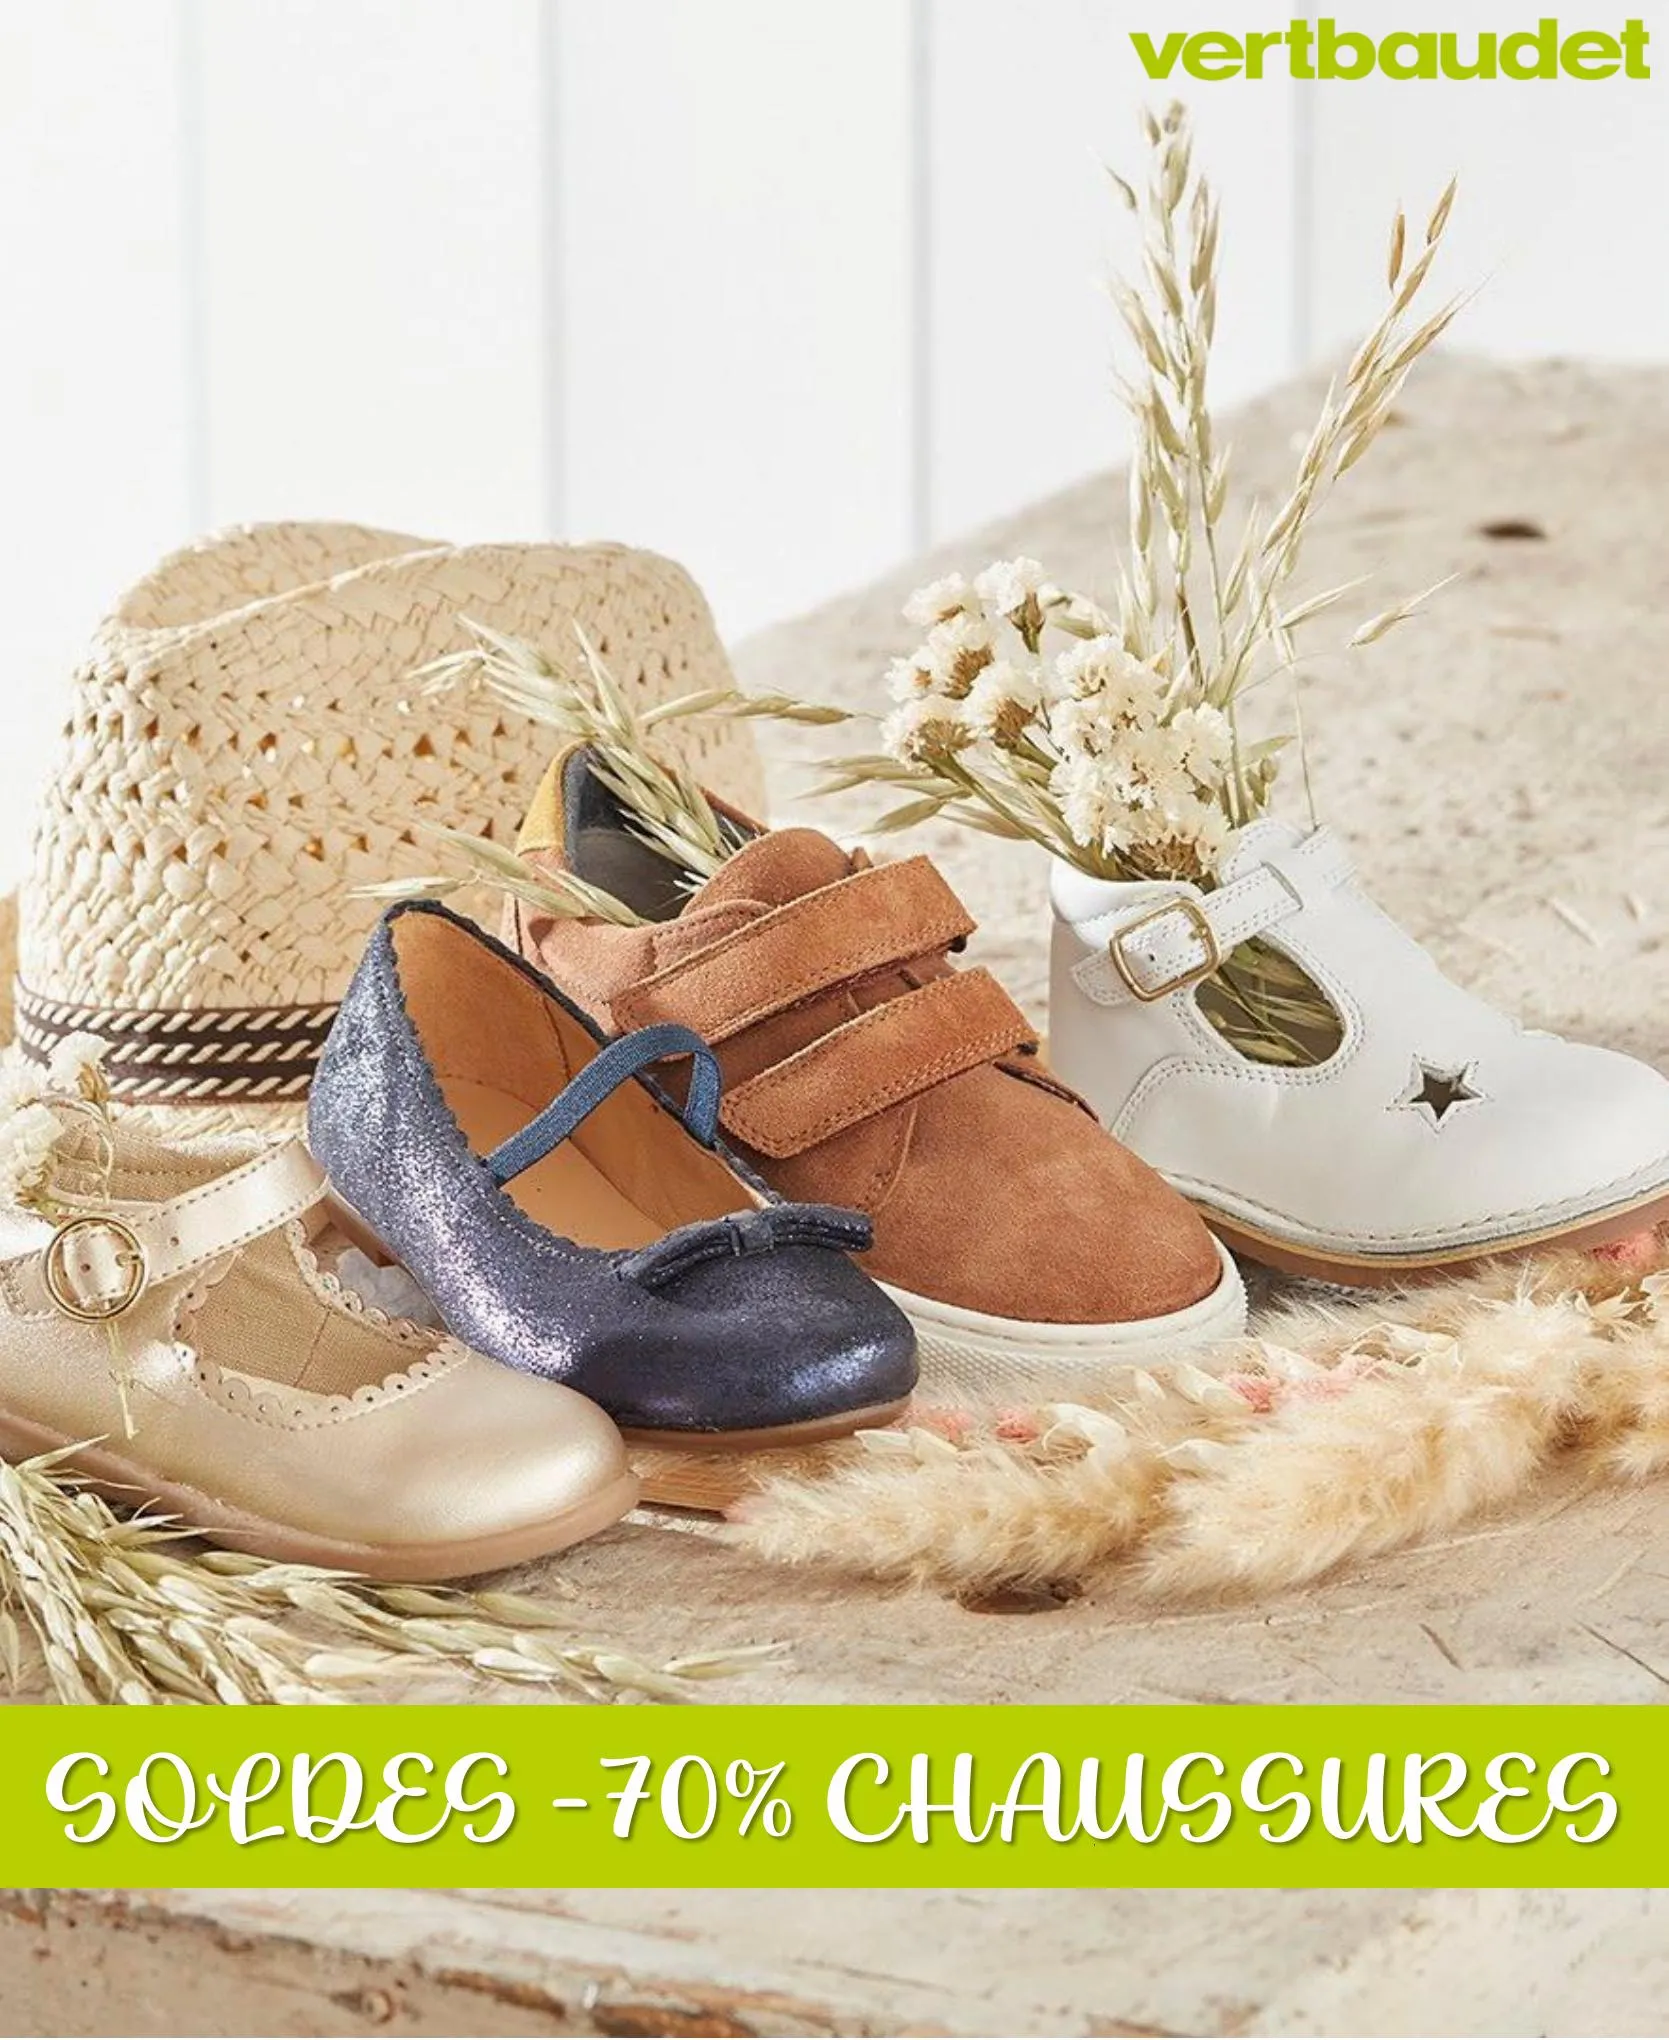 Catalogue SOLDES -70% CHAUSSURES, page 00001